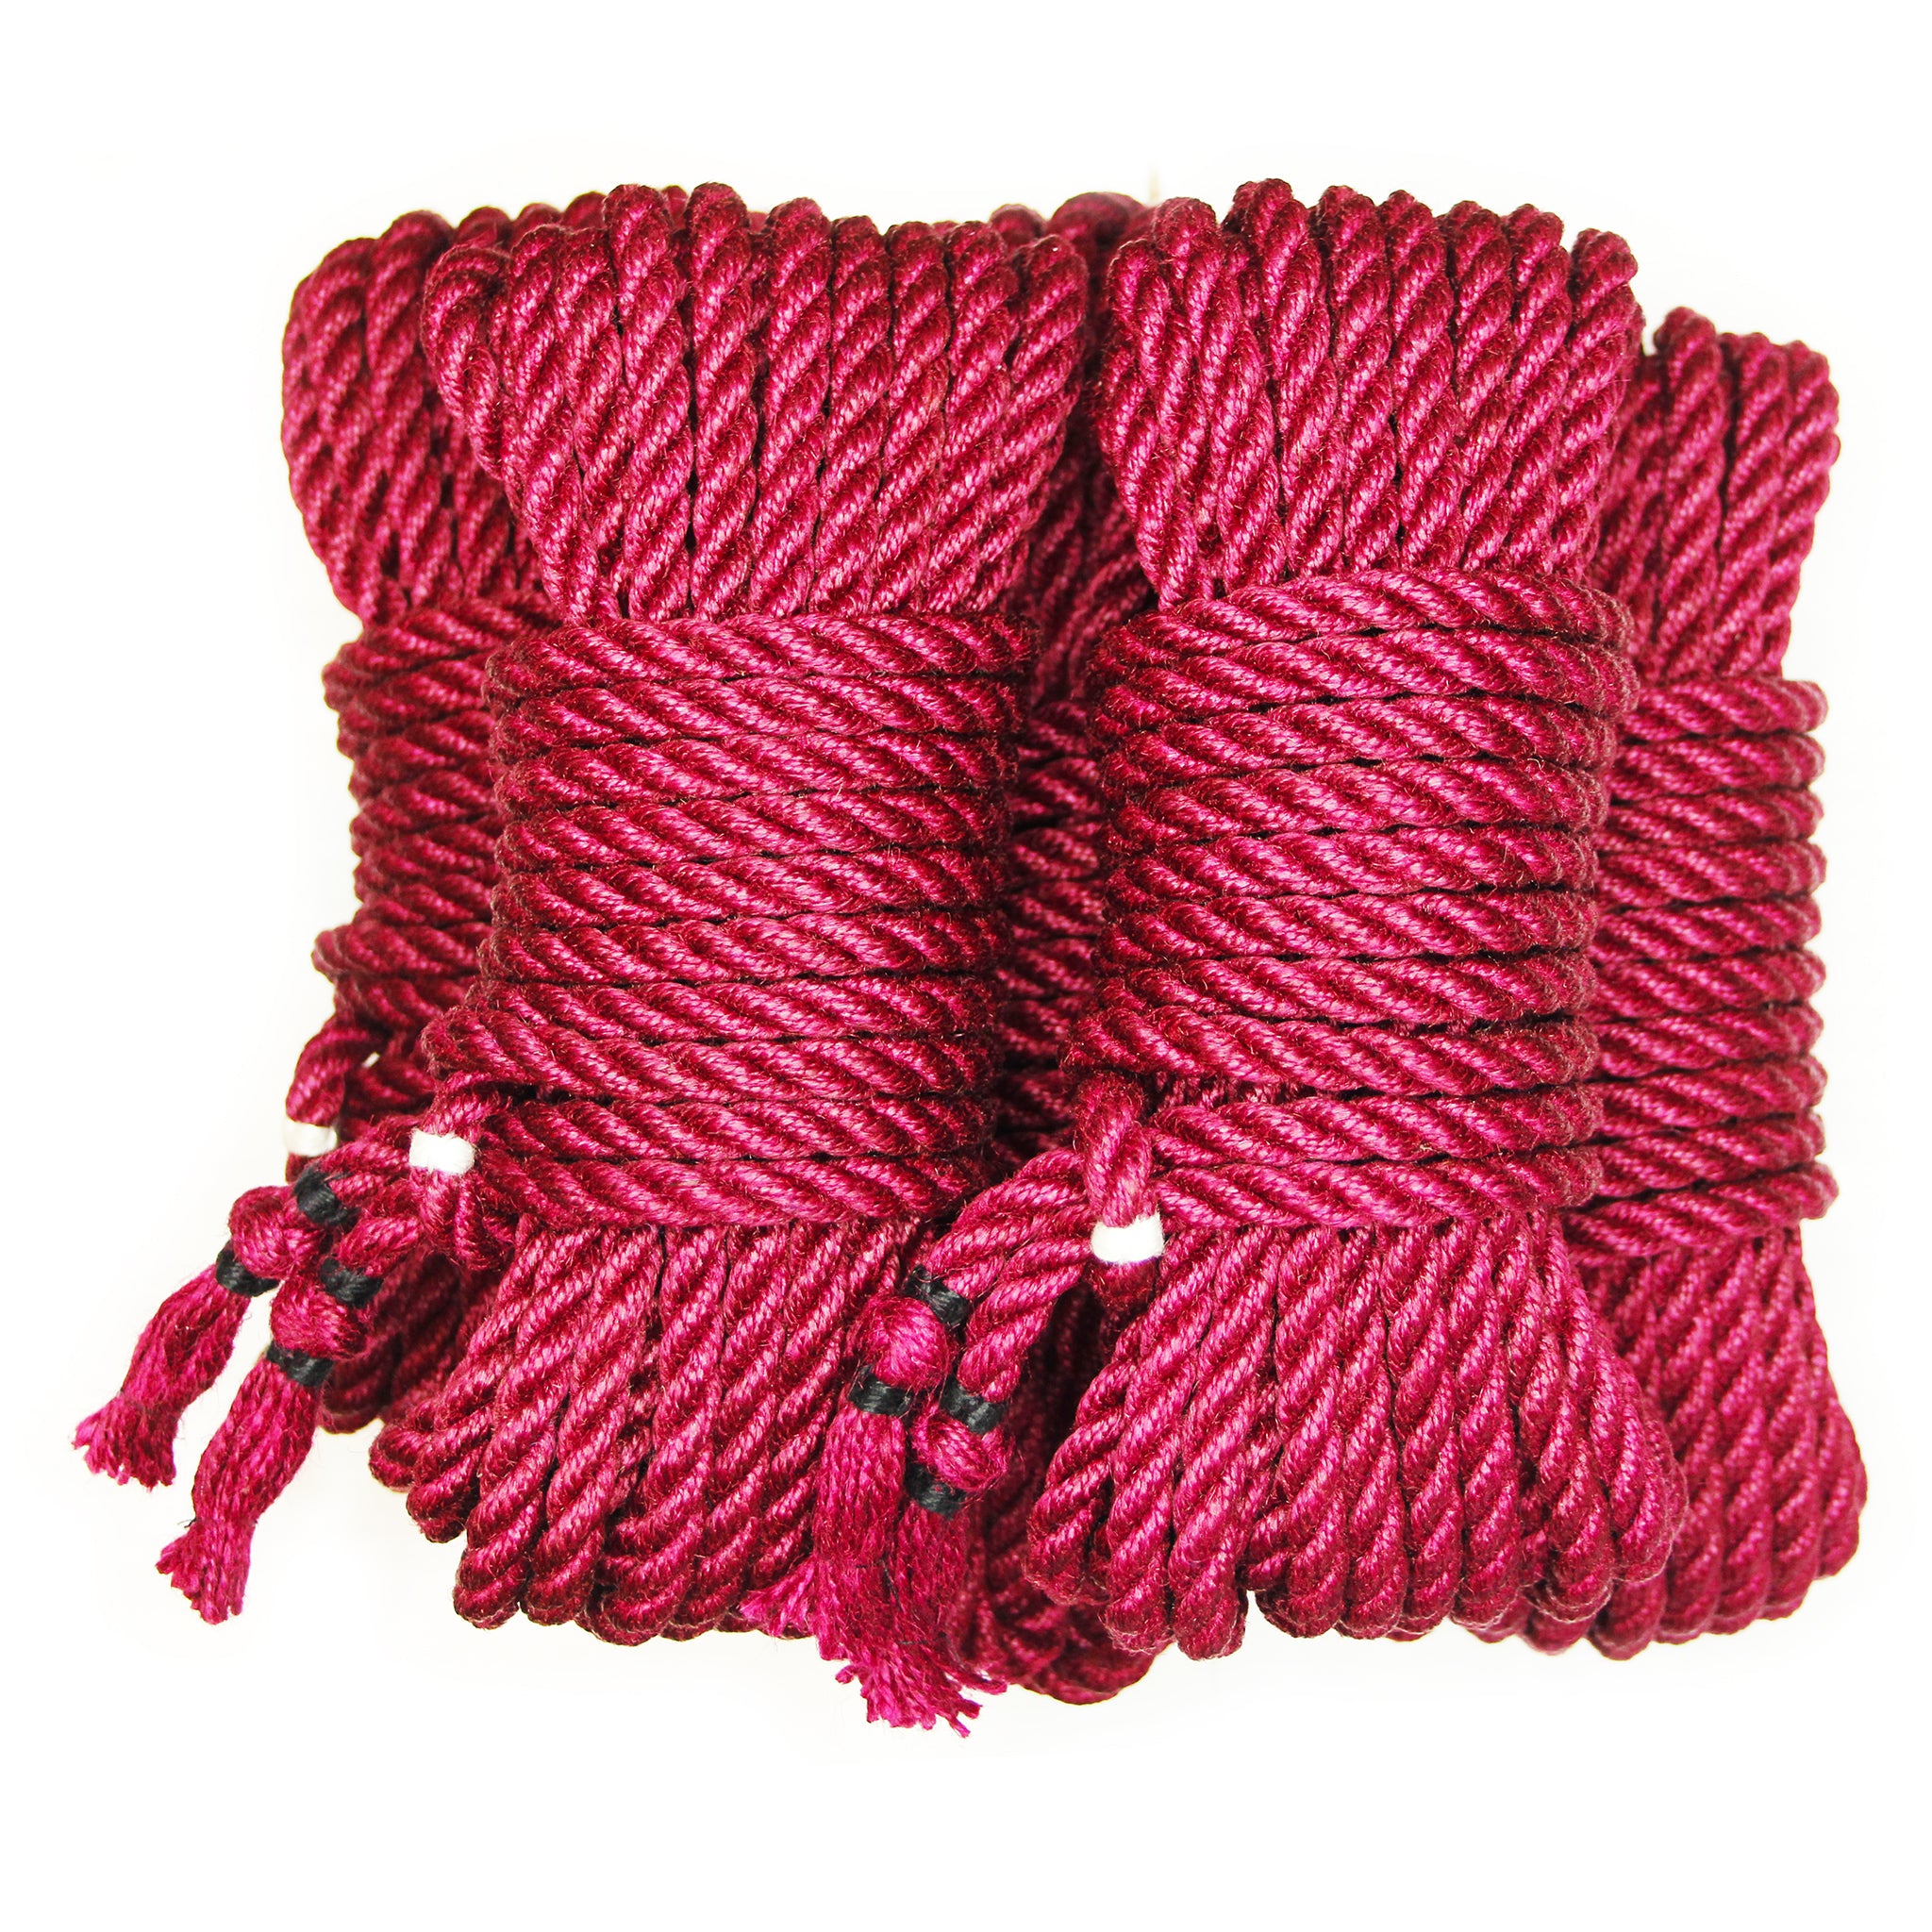 Anemone Jute Twine String 250 mtr 2 Ply Strong Thick Jute Rope 820